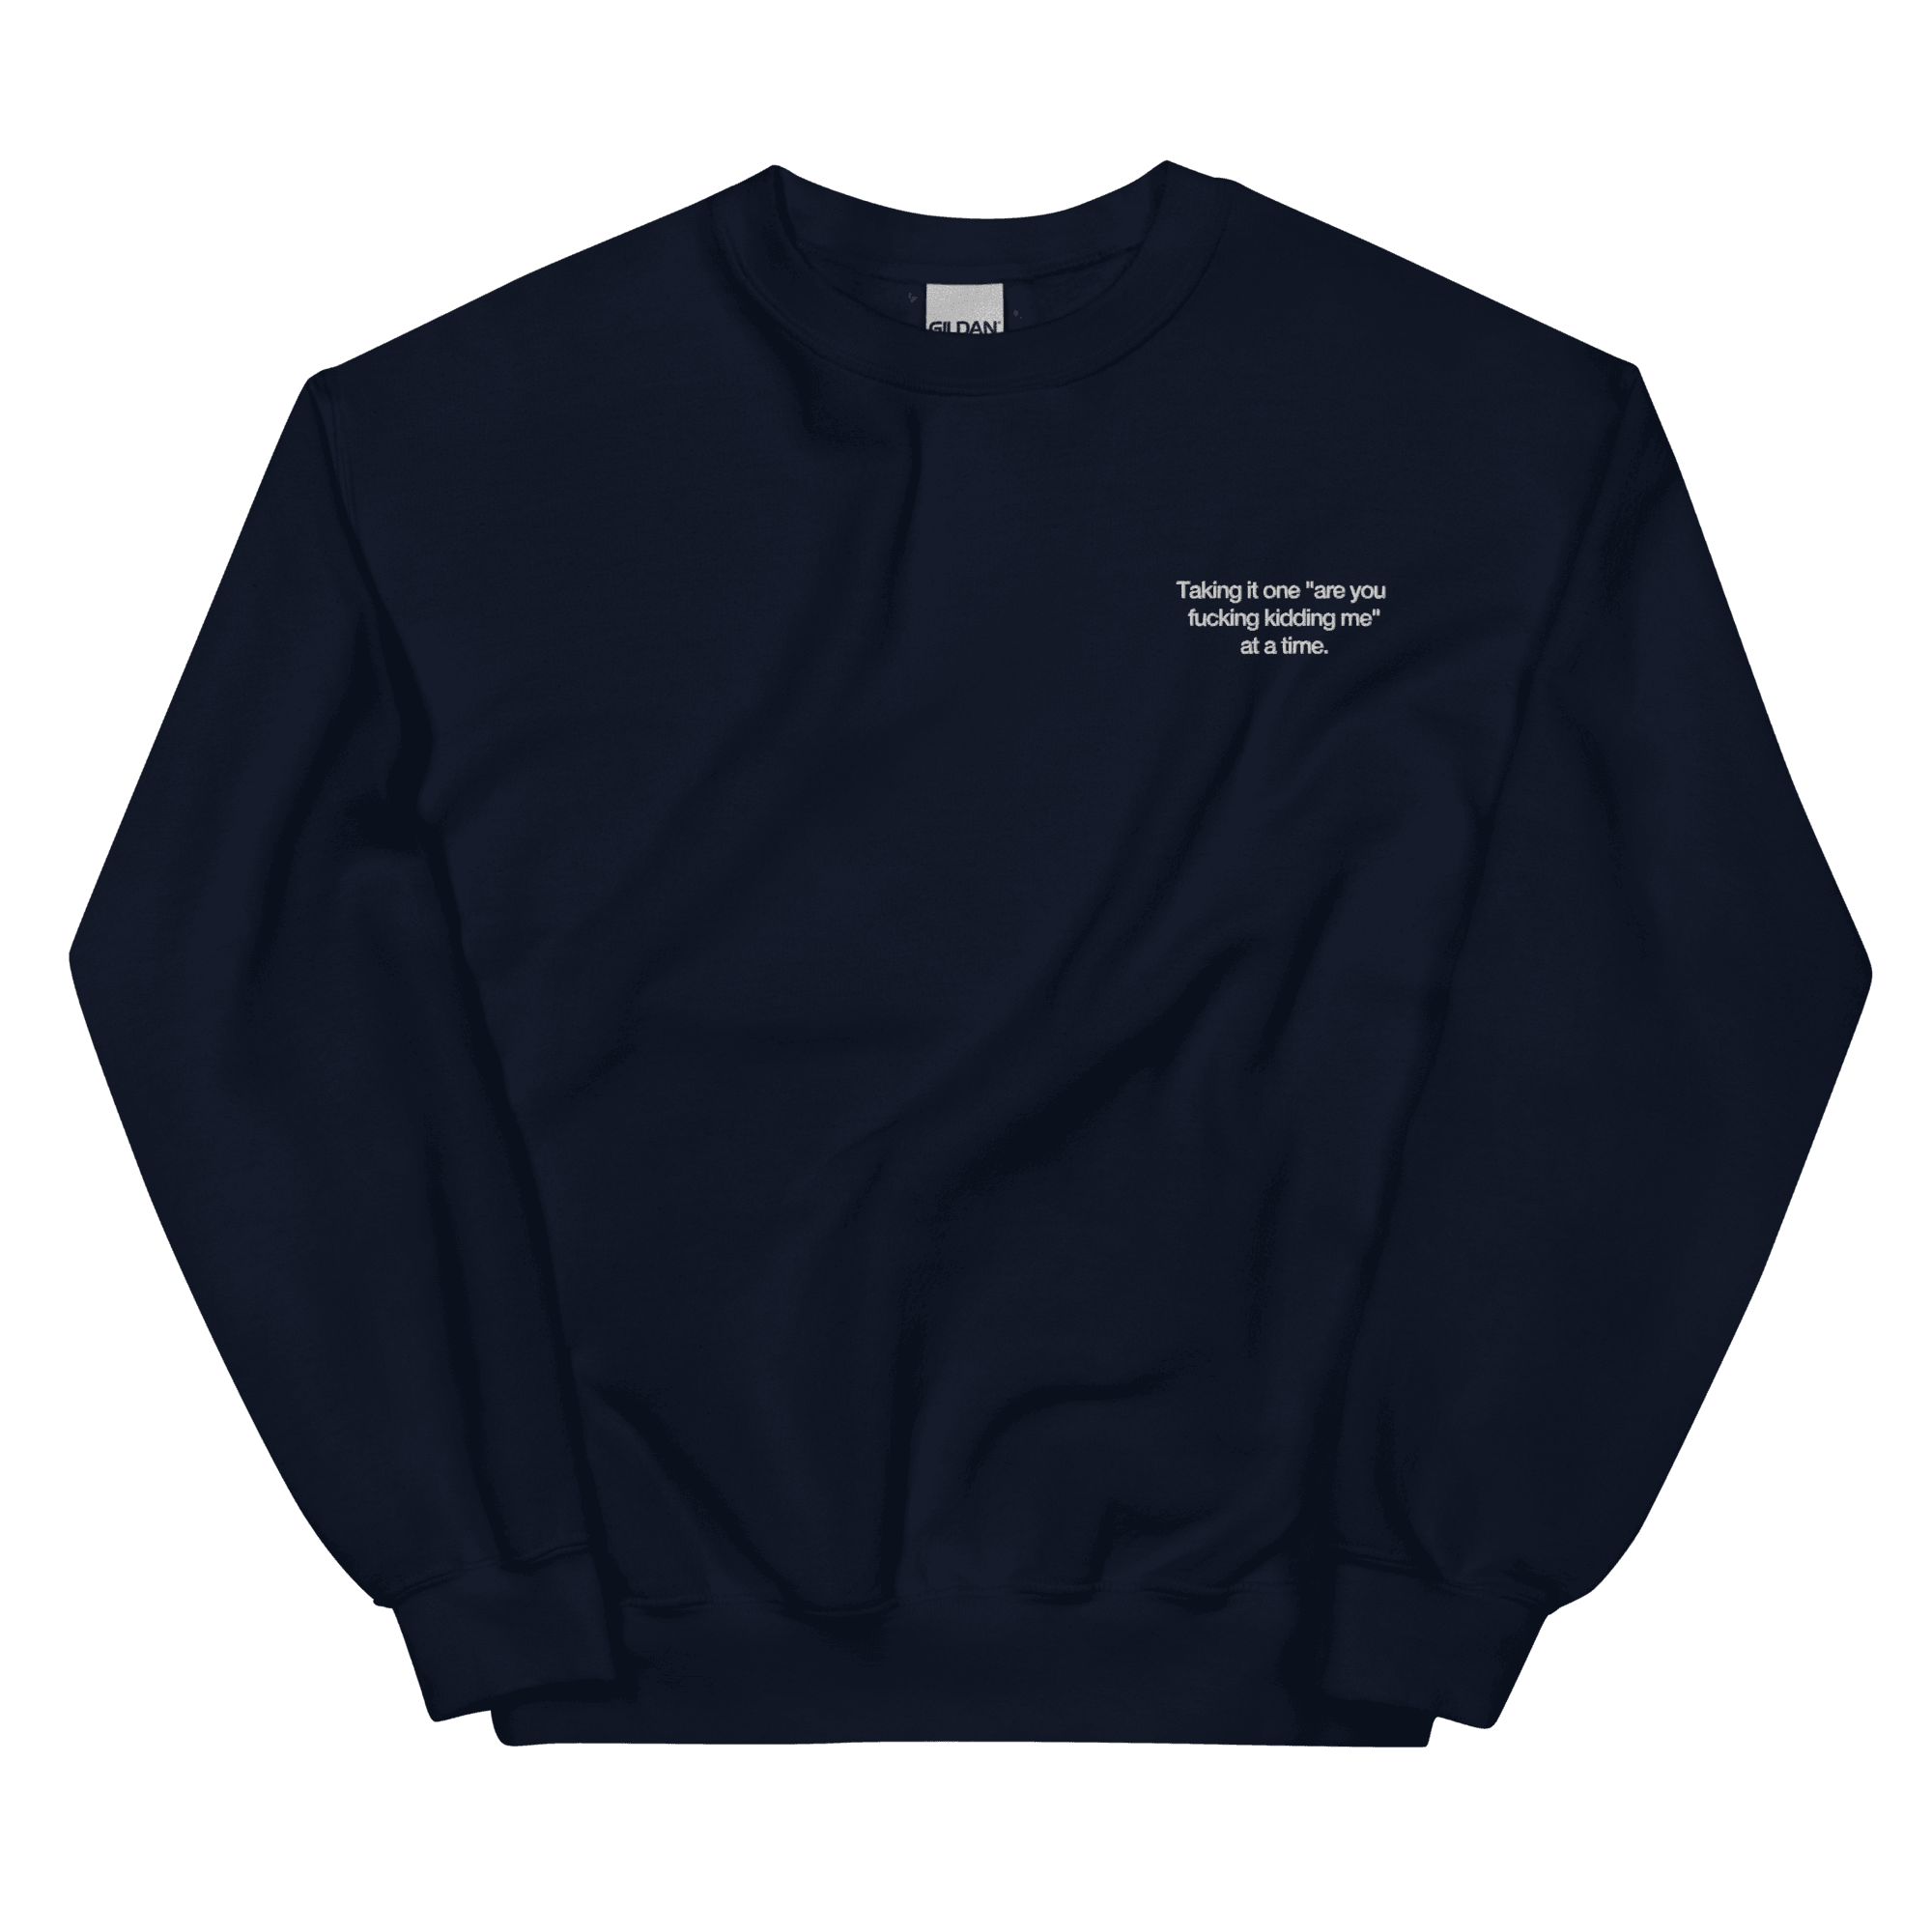 Taking it one "are you fucking kidding me" at a time Sweatshirt - Polychrome Goods 🍊